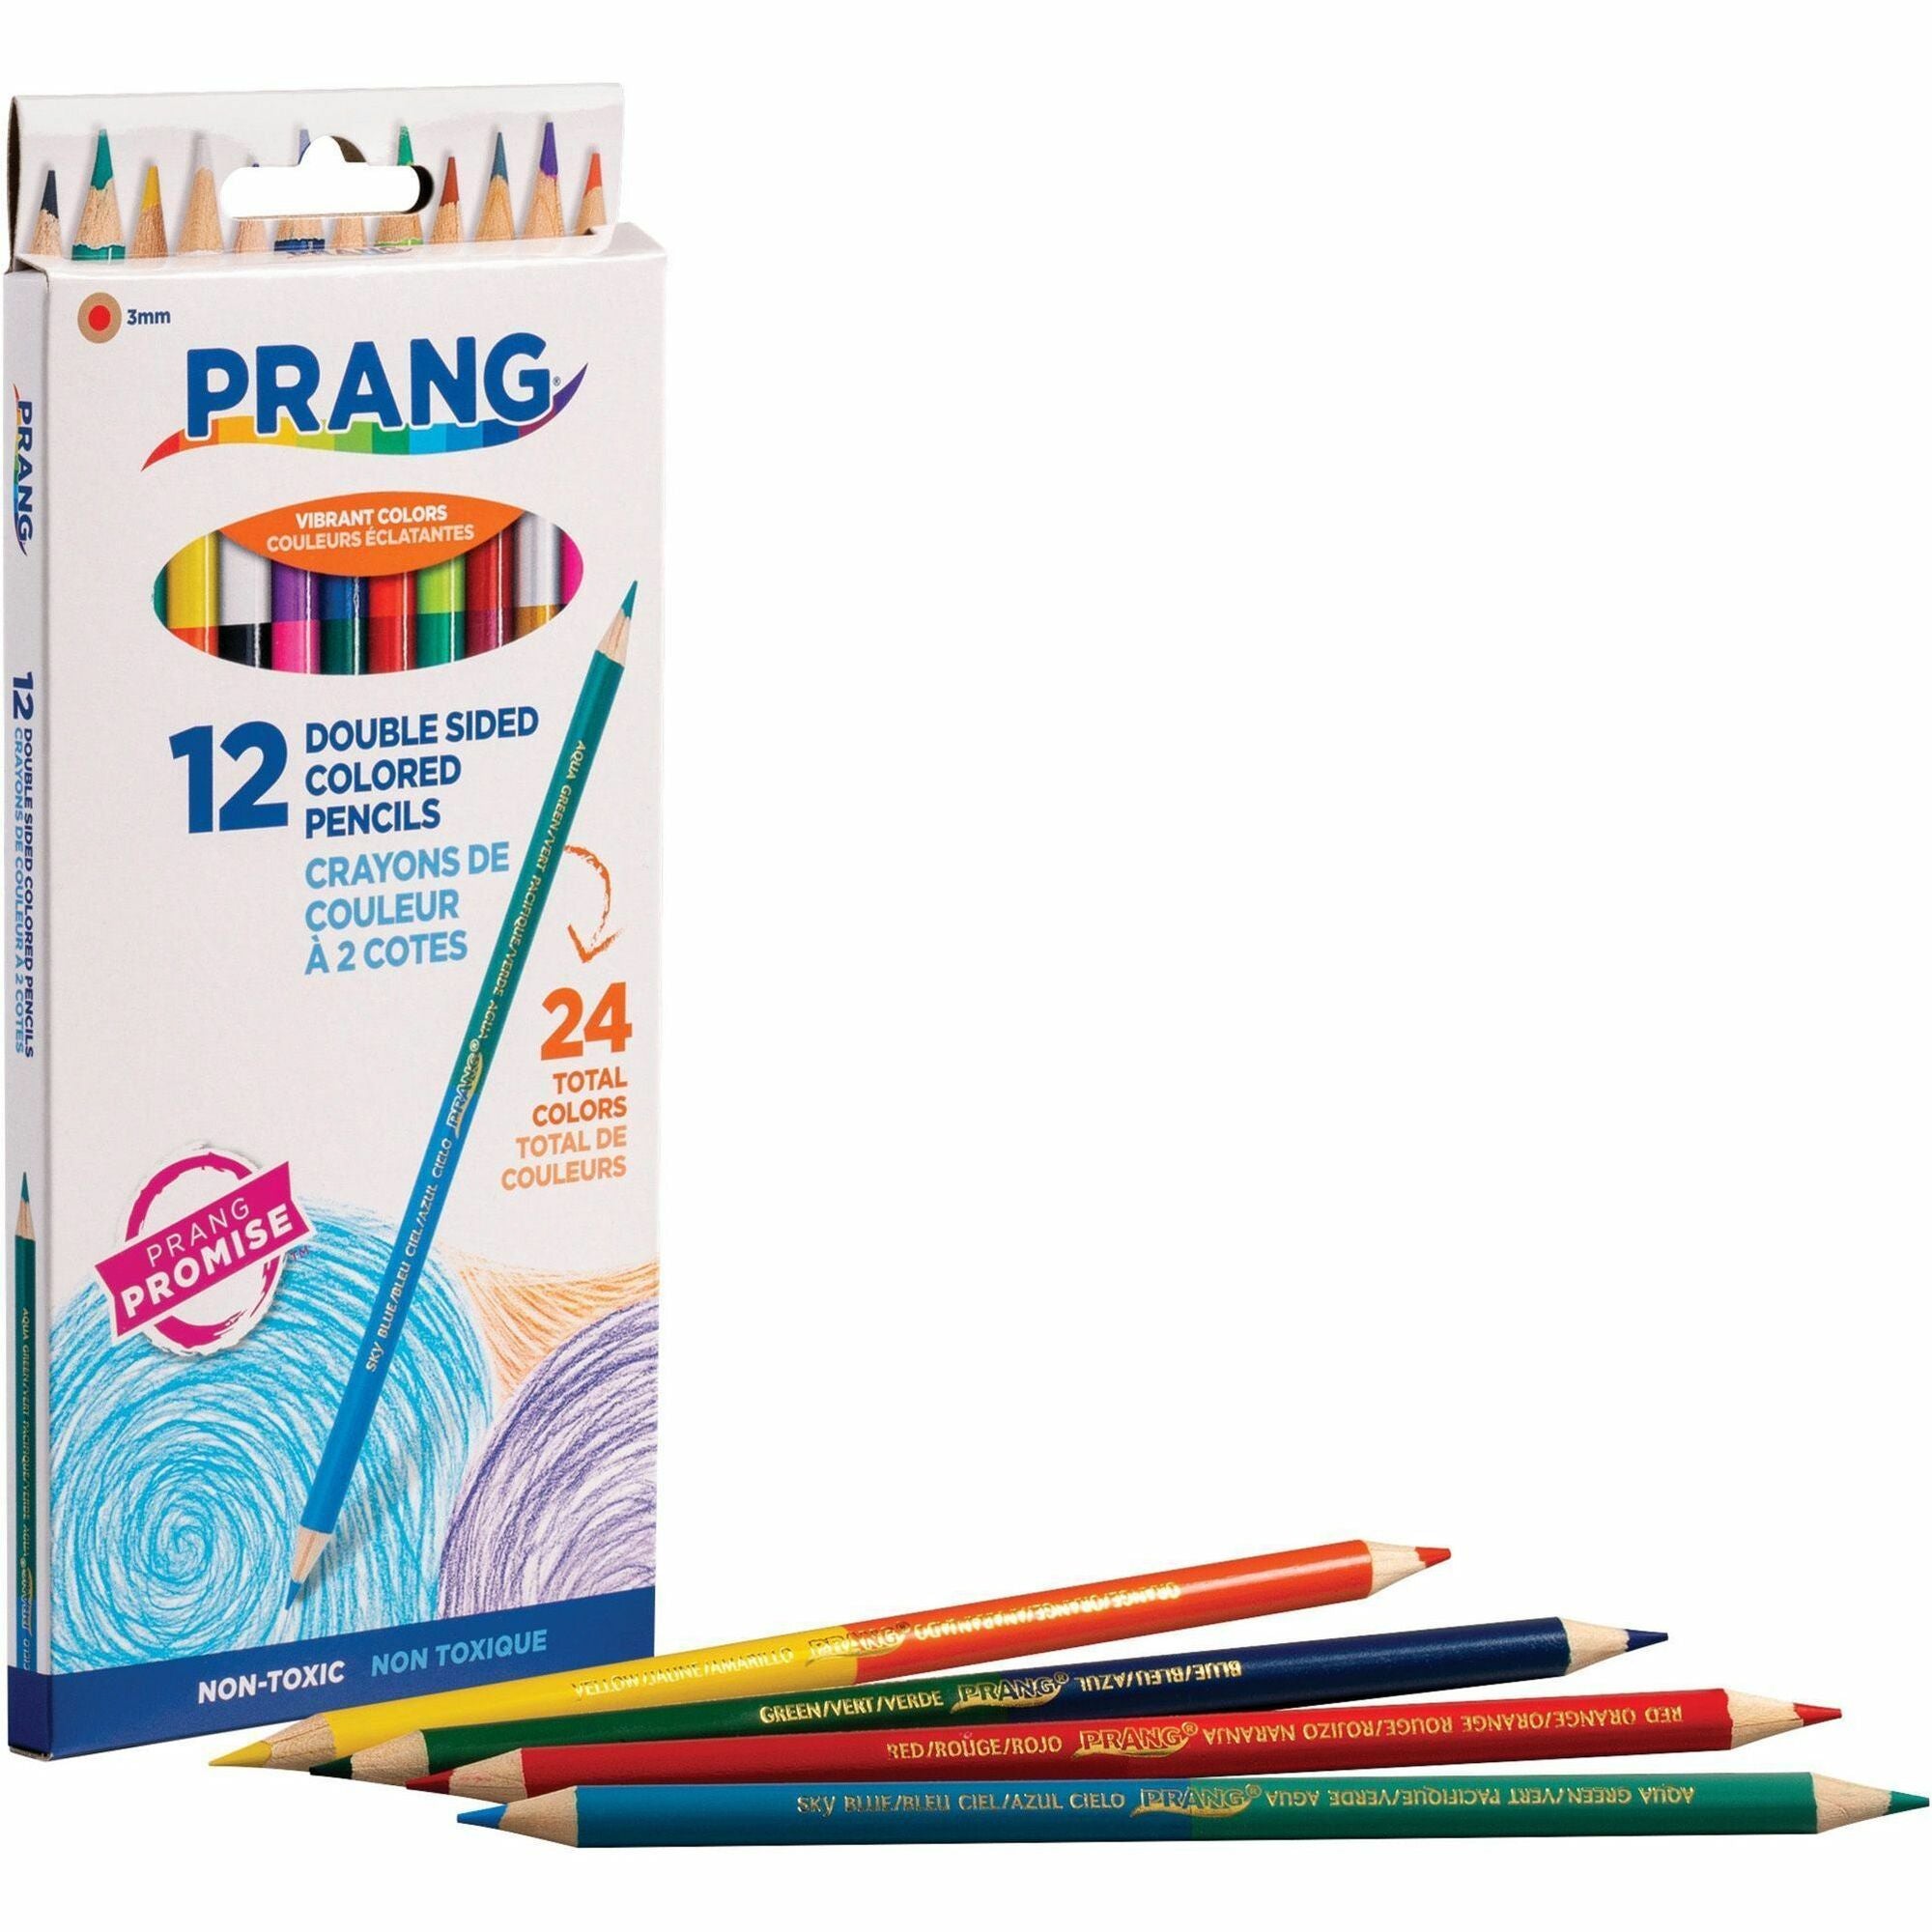 prang-duo-color-double-sided-colored-pencils-3-mm-lead-diameter-1-each_dixx22112 - 1